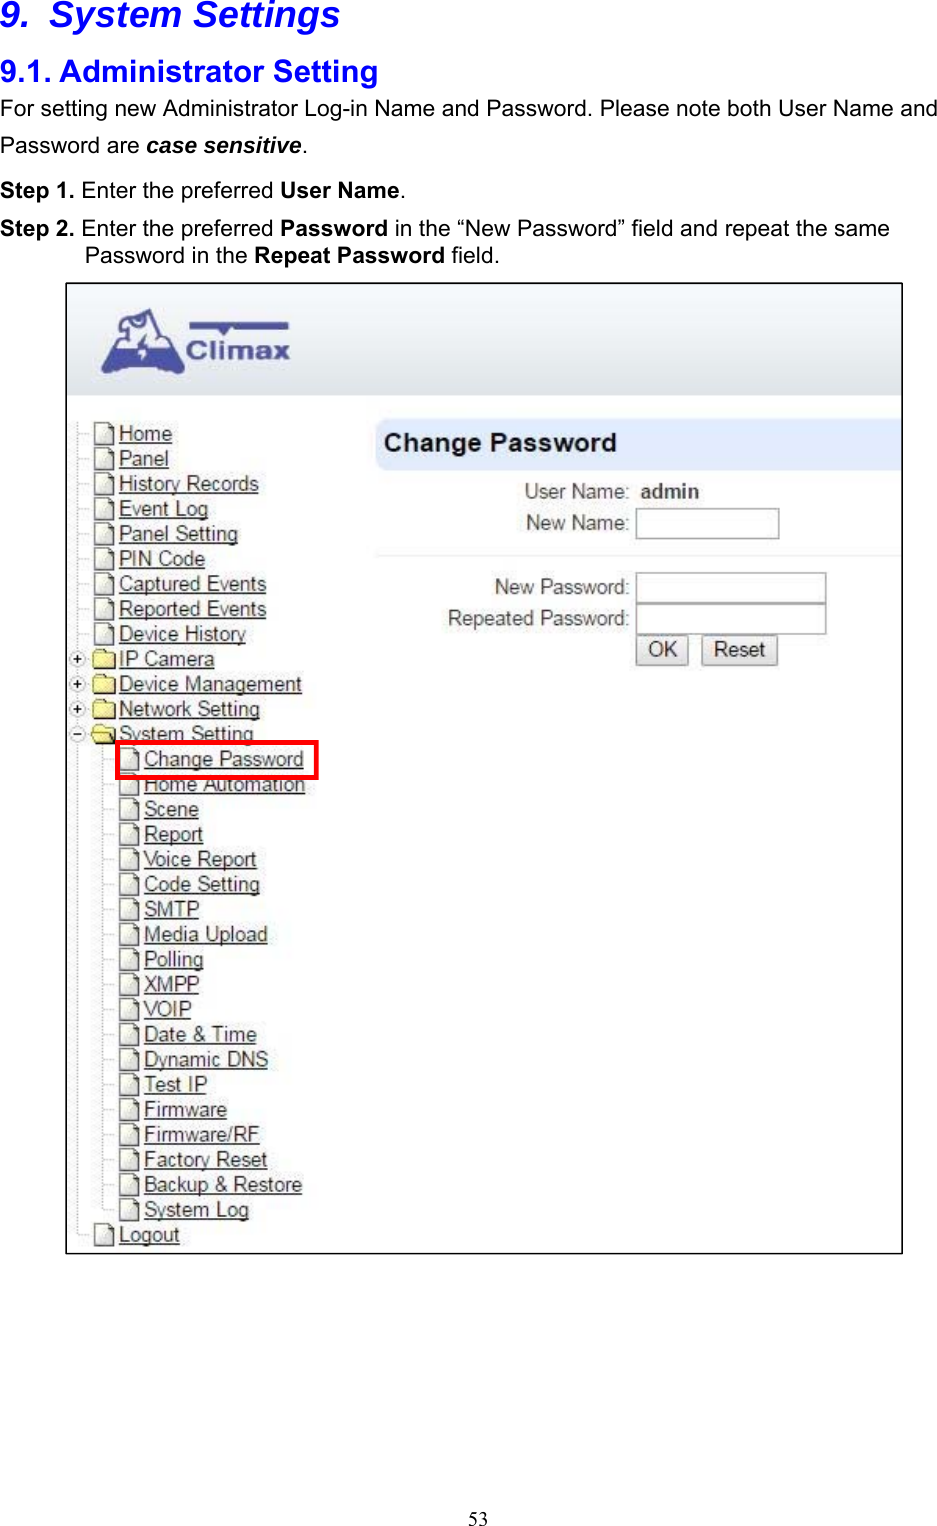  539. System Settings 9.1. Administrator Setting For setting new Administrator Log-in Name and Password. Please note both User Name and Password are case sensitive.   Step 1. Enter the preferred User Name.   Step 2. Enter the preferred Password in the “New Password” field and repeat the same Password in the Repeat Password field.       